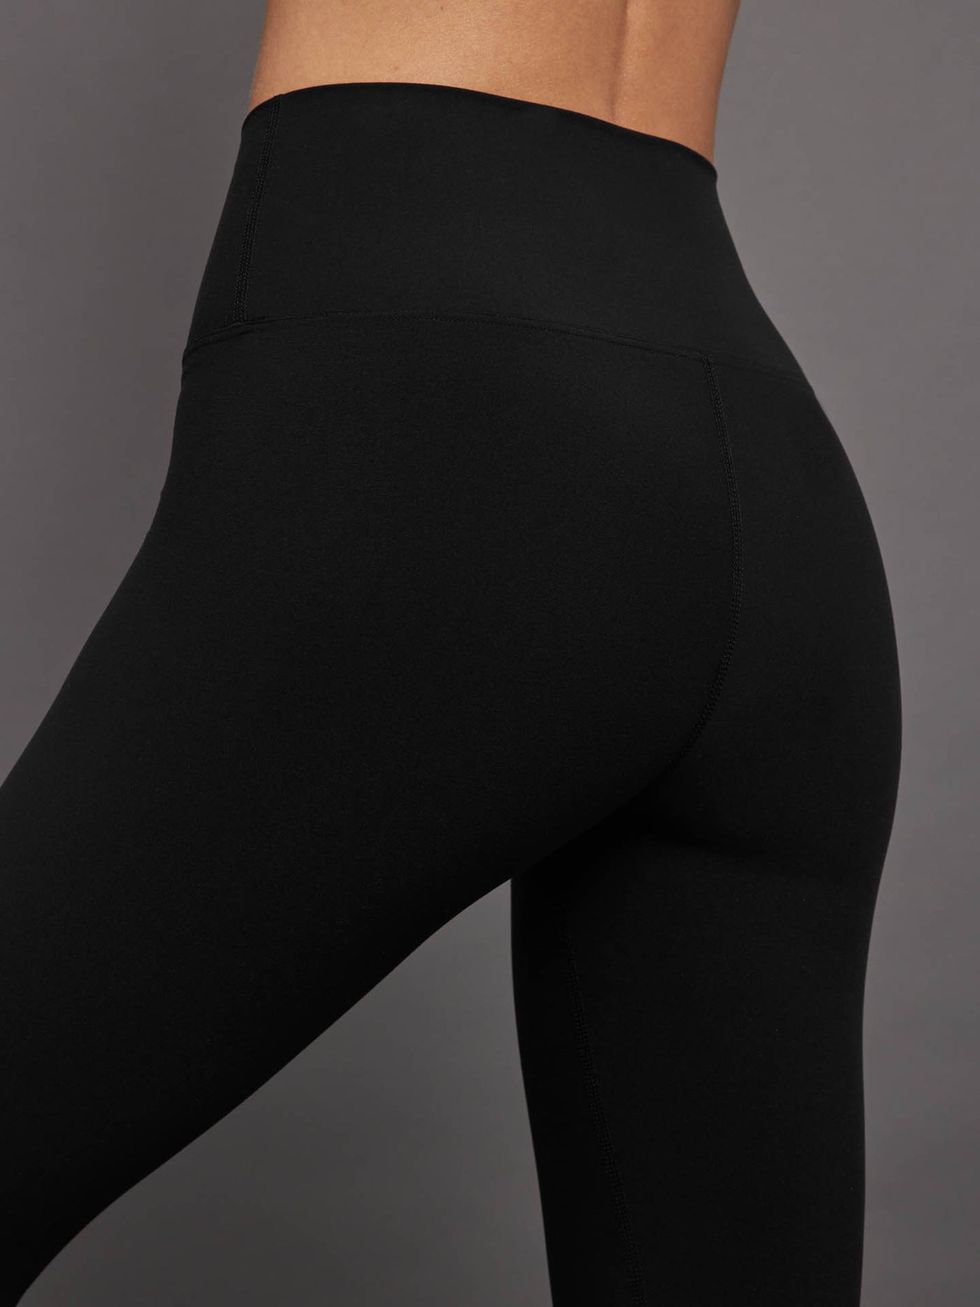 Beyond Athletica - Apex Legging In Barely There - Bronzed Black